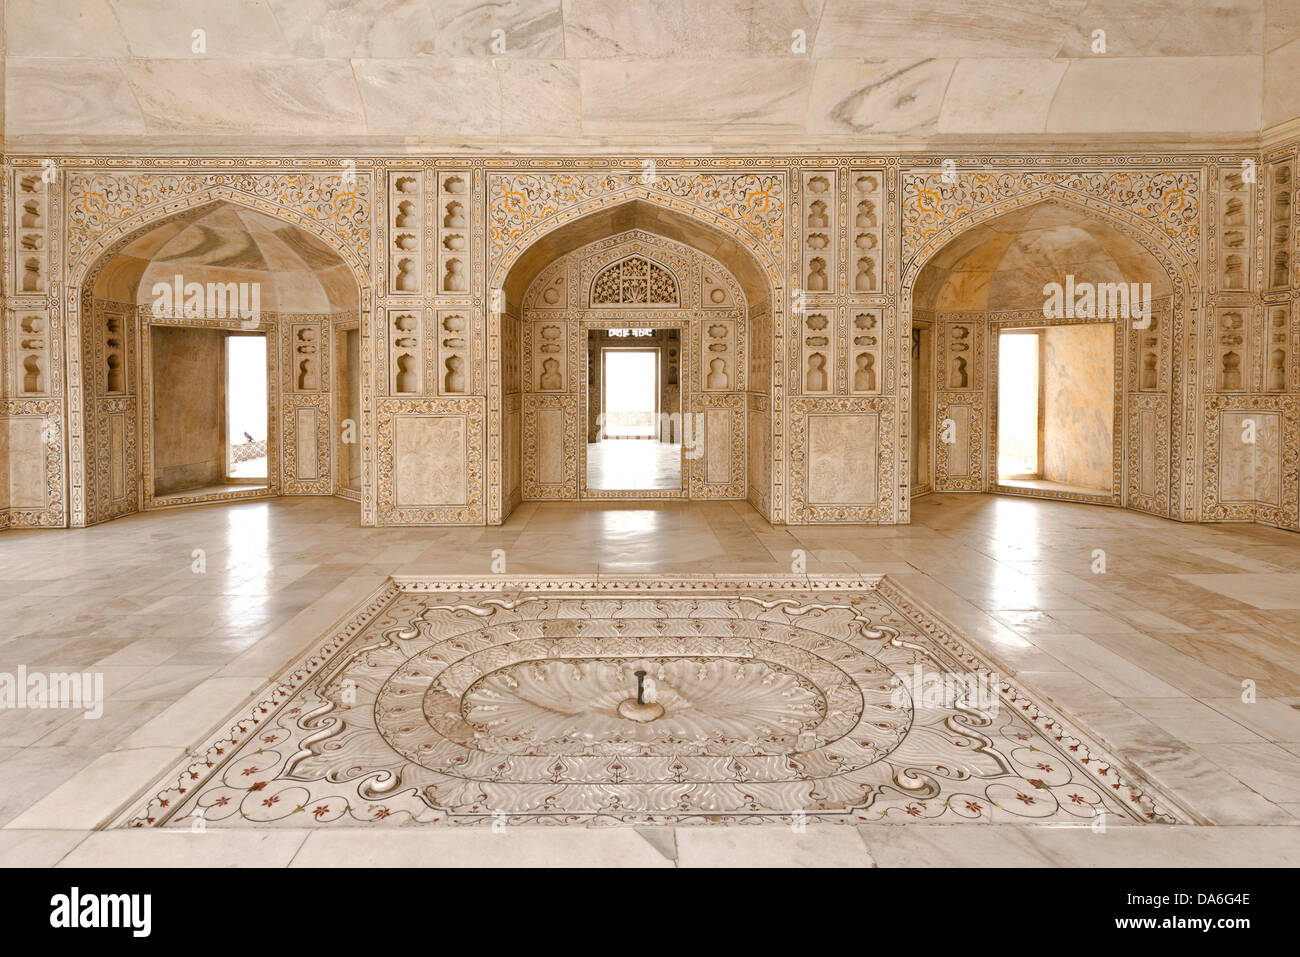 Coloured stone and glass inlays in the marble pavilion of Khas Mahal, Red Fort Stock Photo